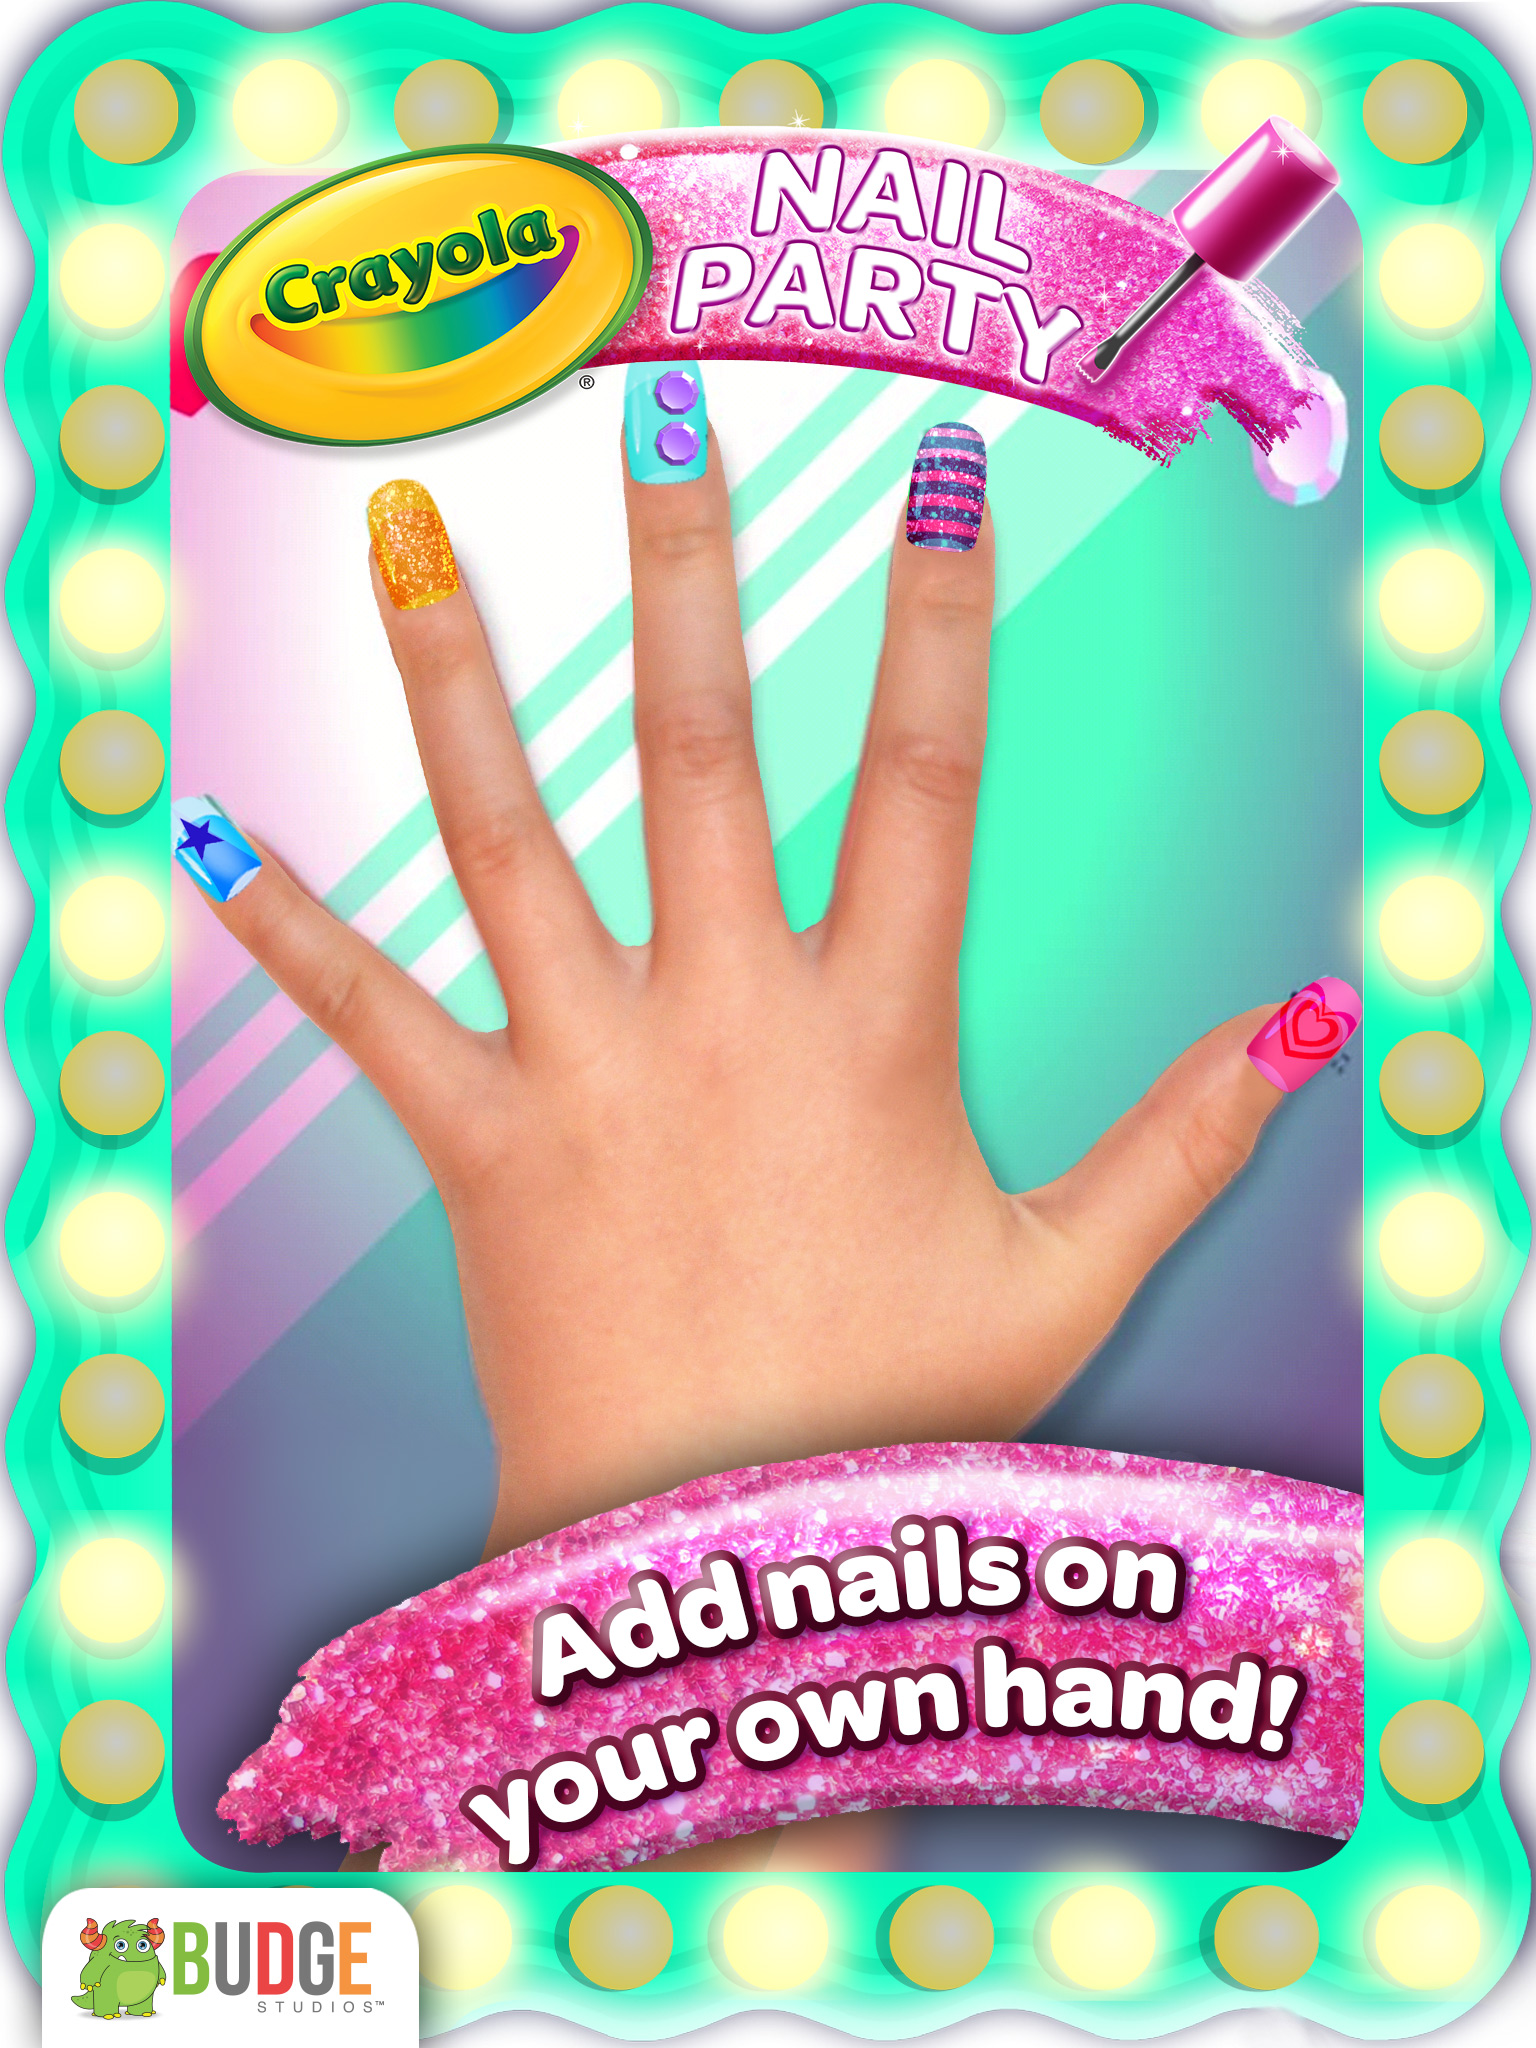 Add nails on your own hands!